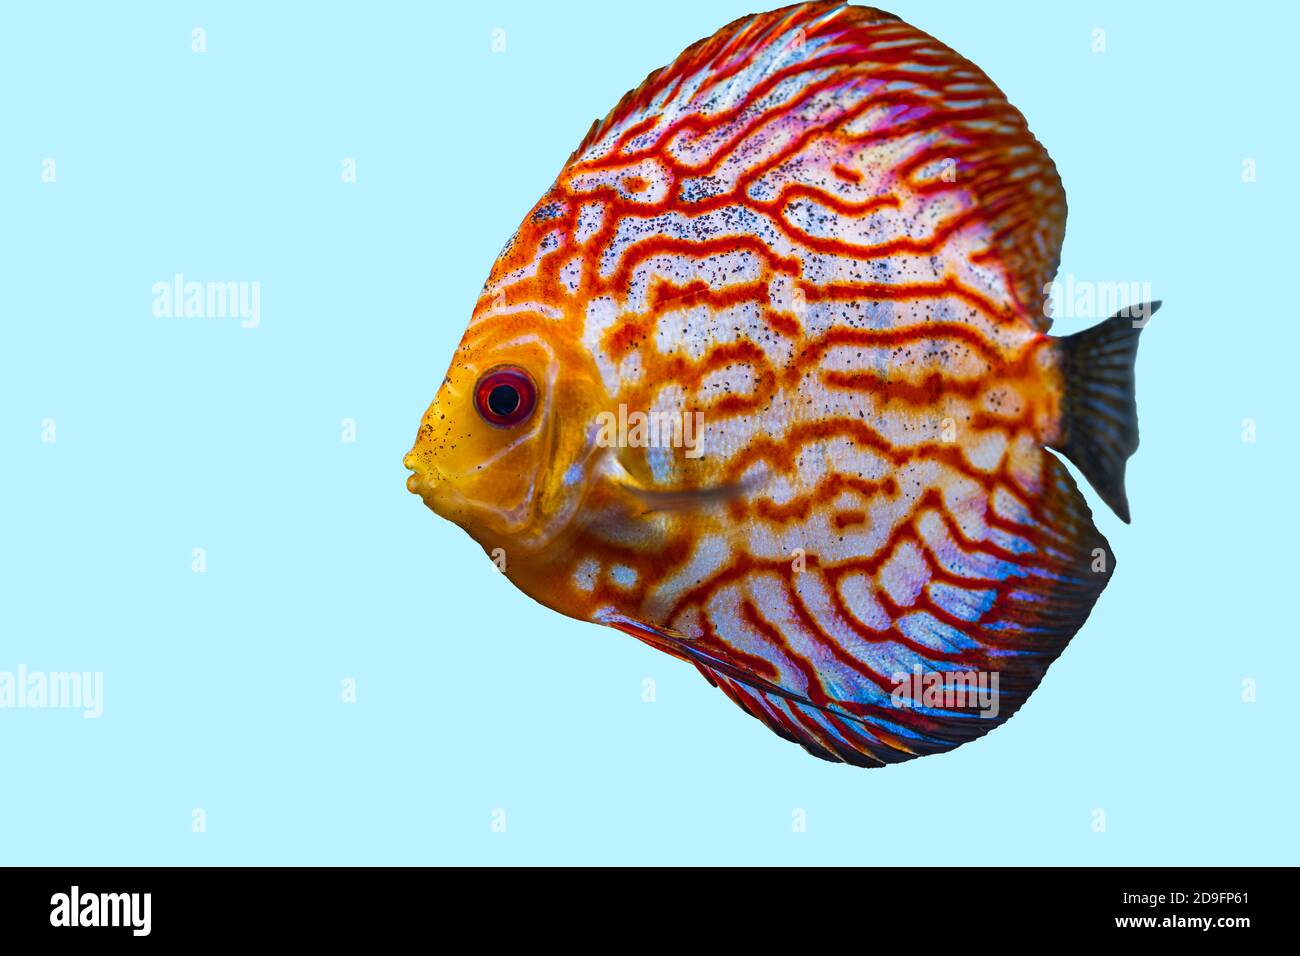 Close up view of gorgeous checkerboard red map discus aquarium fish isolated on blue background. Hobby concept. Stock Photo